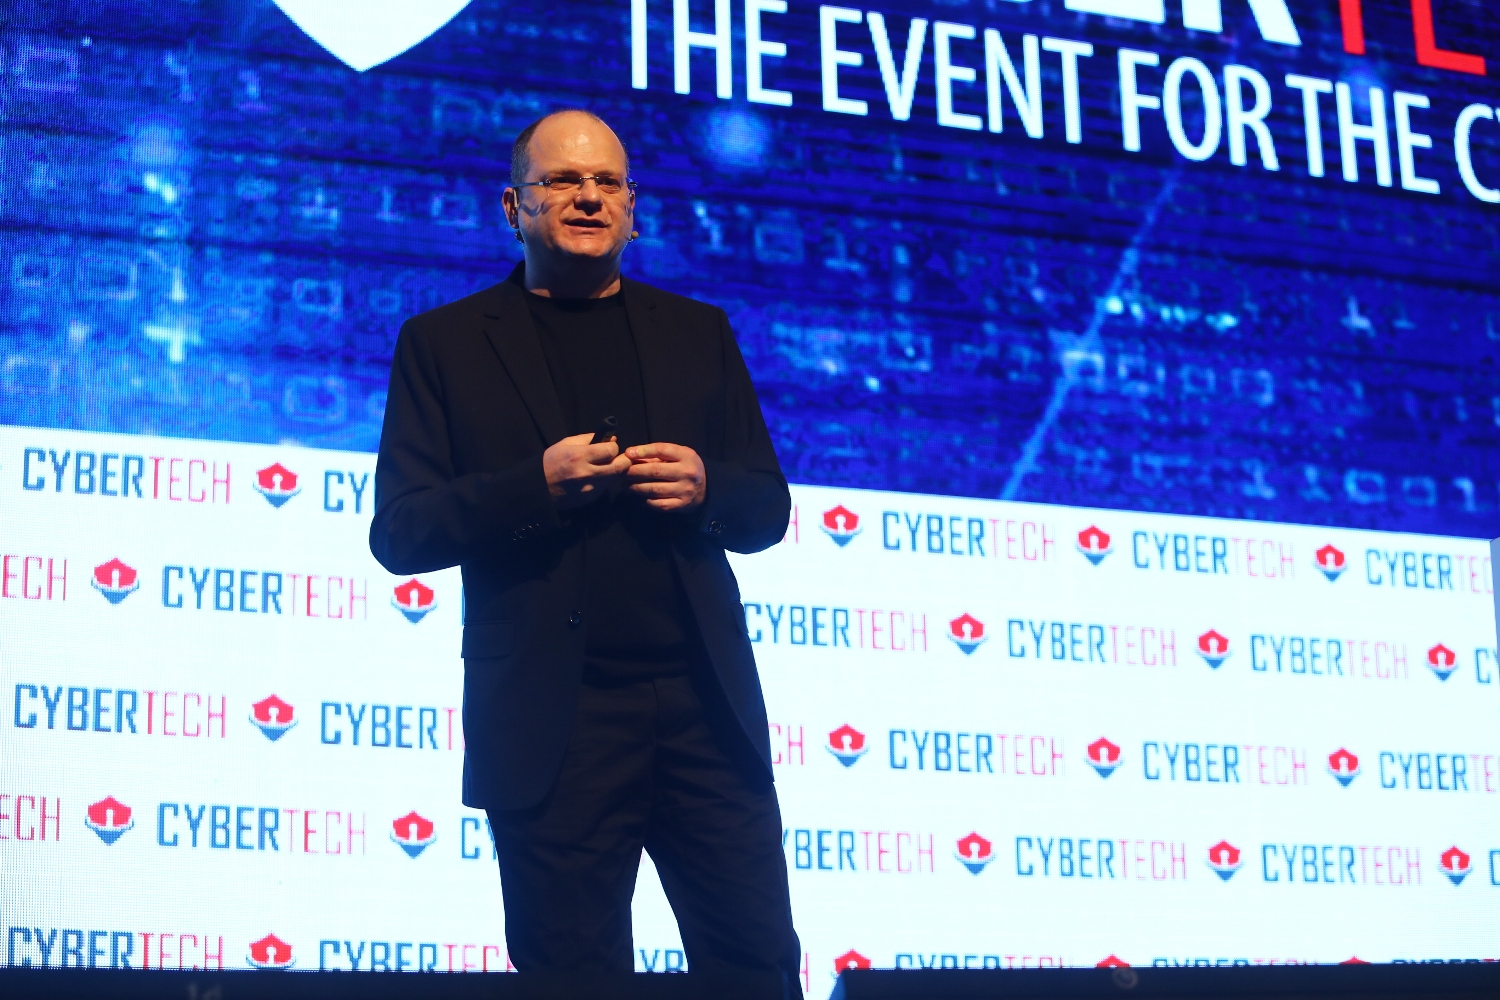 Gil Shwed, founder and CEO of Check Point Software Technologies, a pioneer of firewall security, speaking at Cybertech 2017. Photo by Gilad Kavalerchik